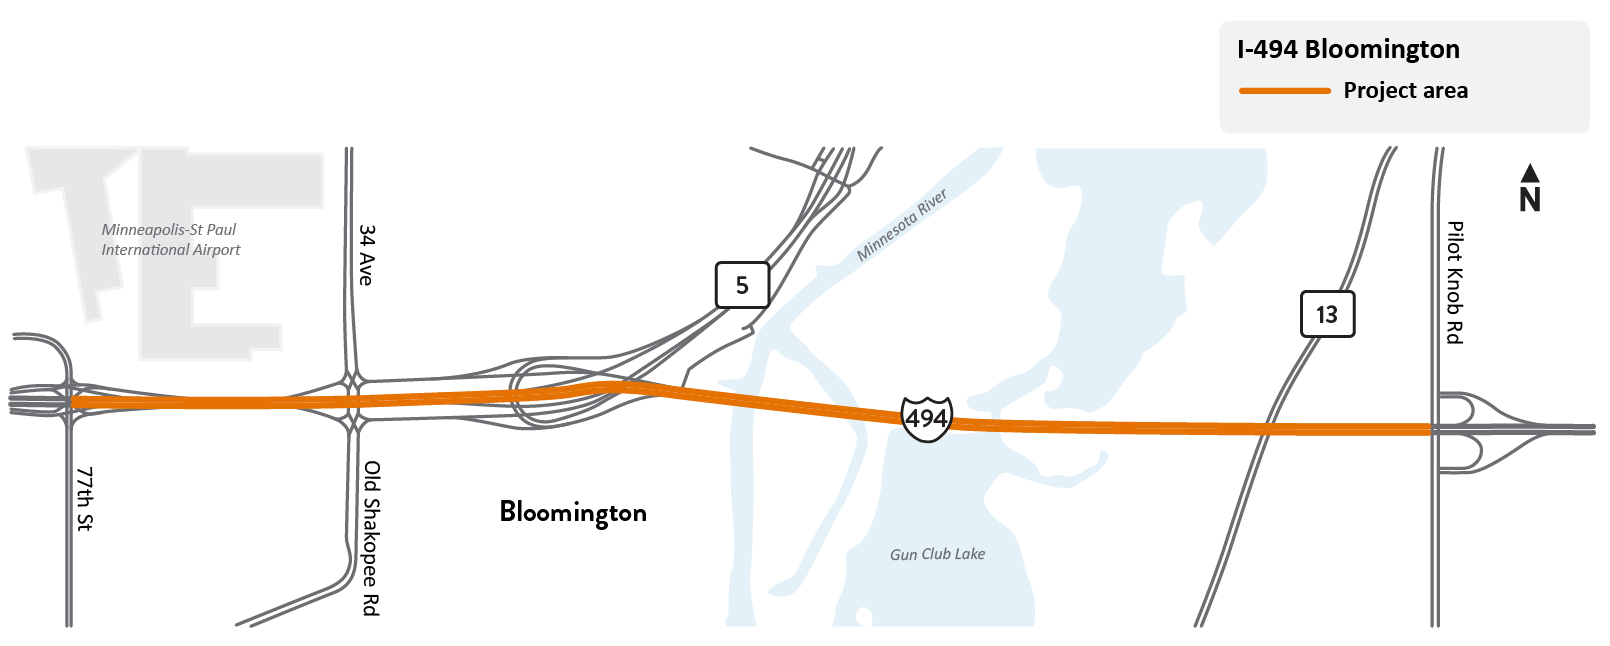 I-494 bridge over the Minnesota River between 24th Ave. in Bloomington and Pilot Knob Rd. in Mendota Heights/Eagan project location map